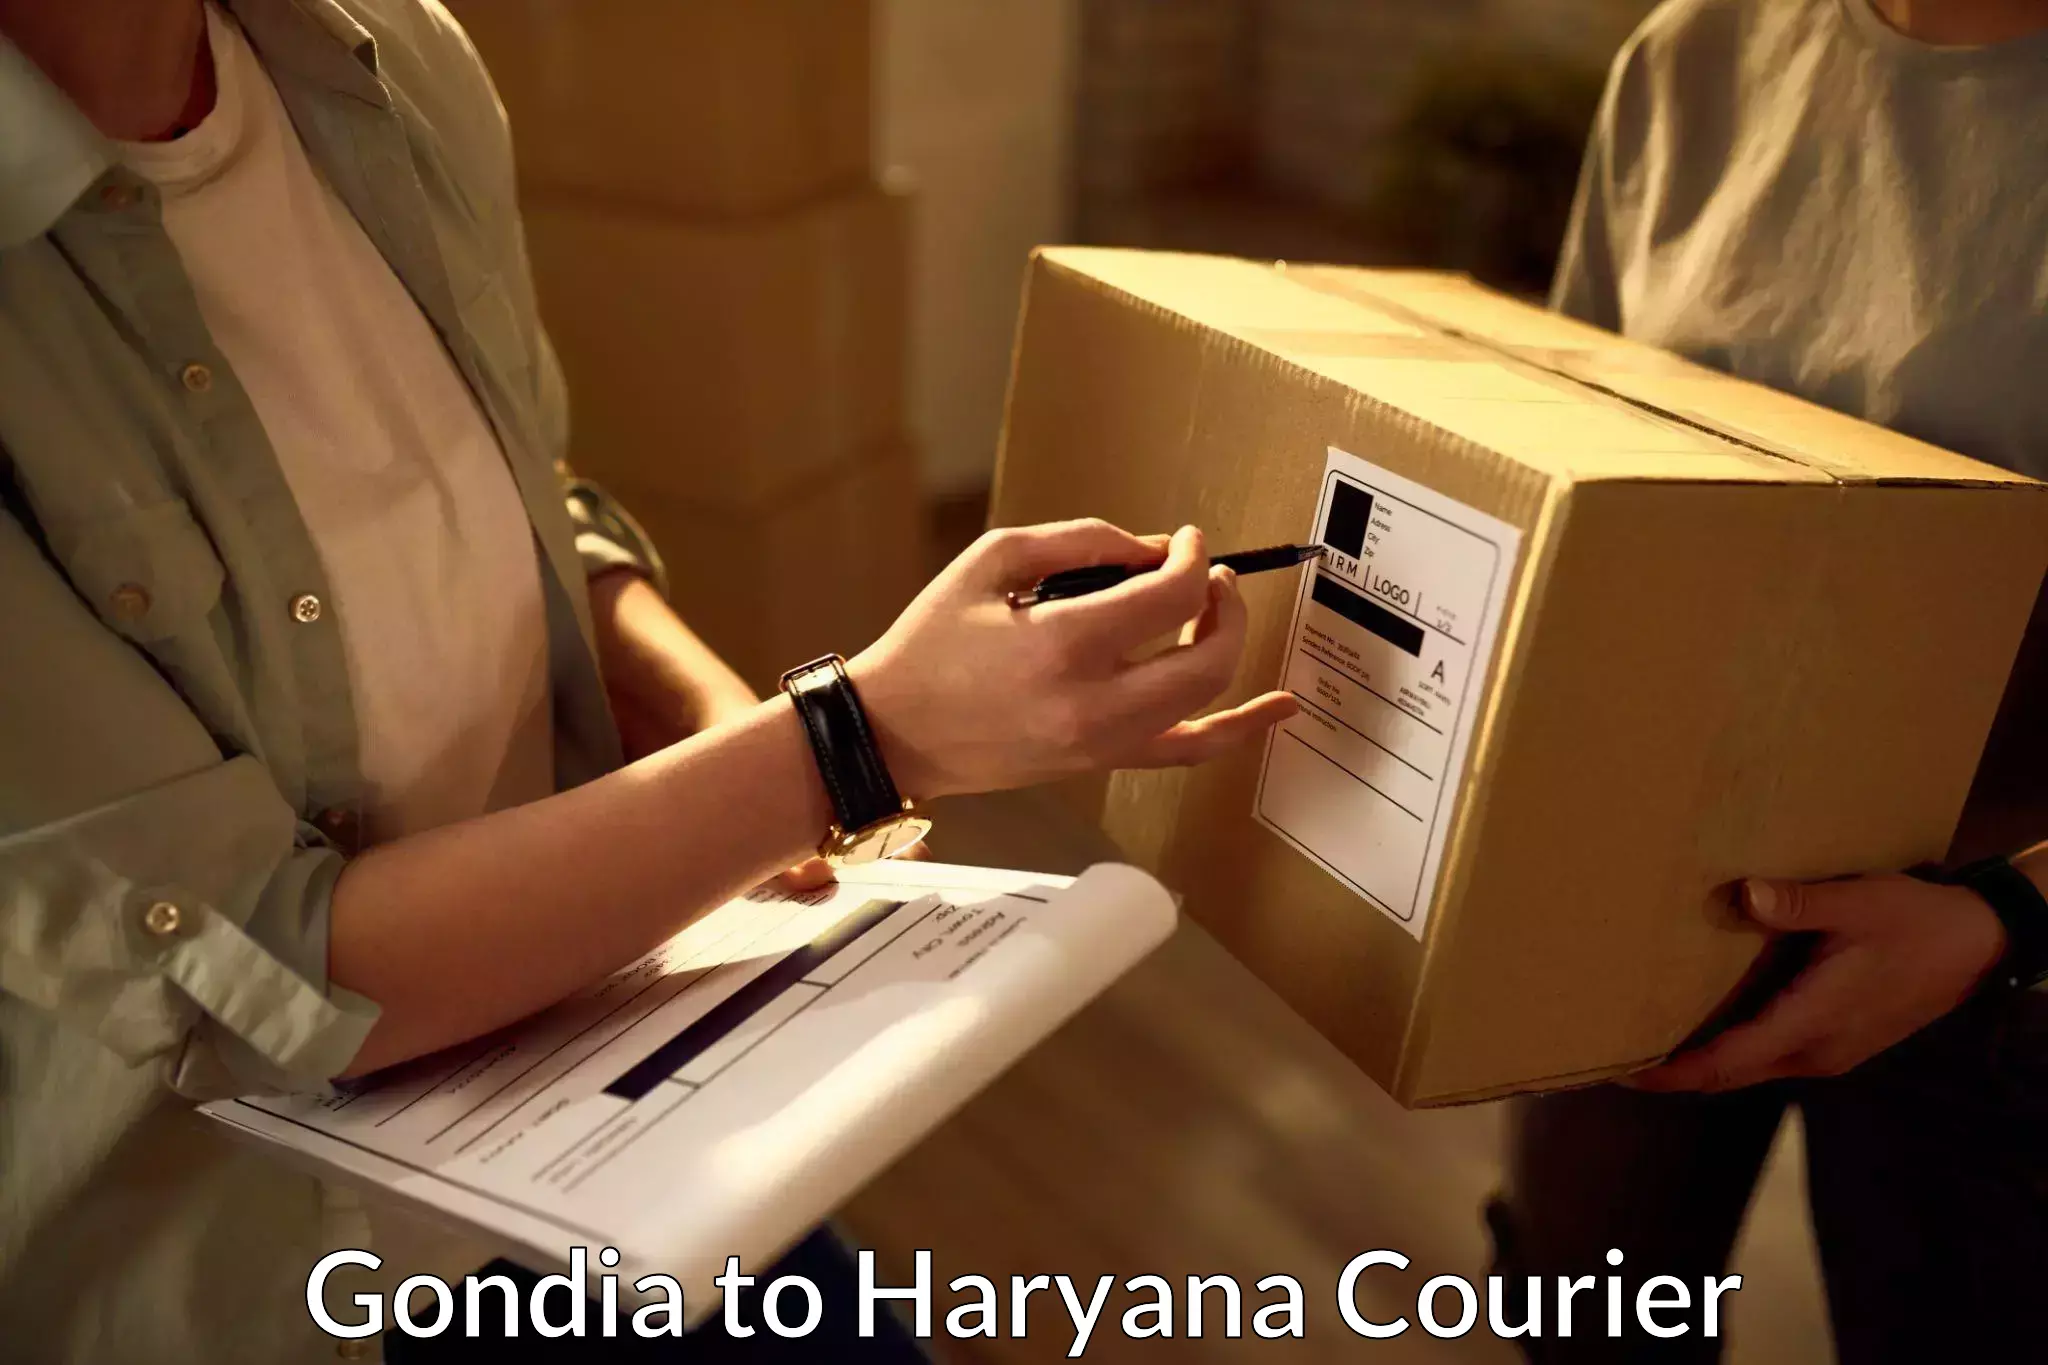 Global shipping solutions in Gondia to IIIT Sonepat